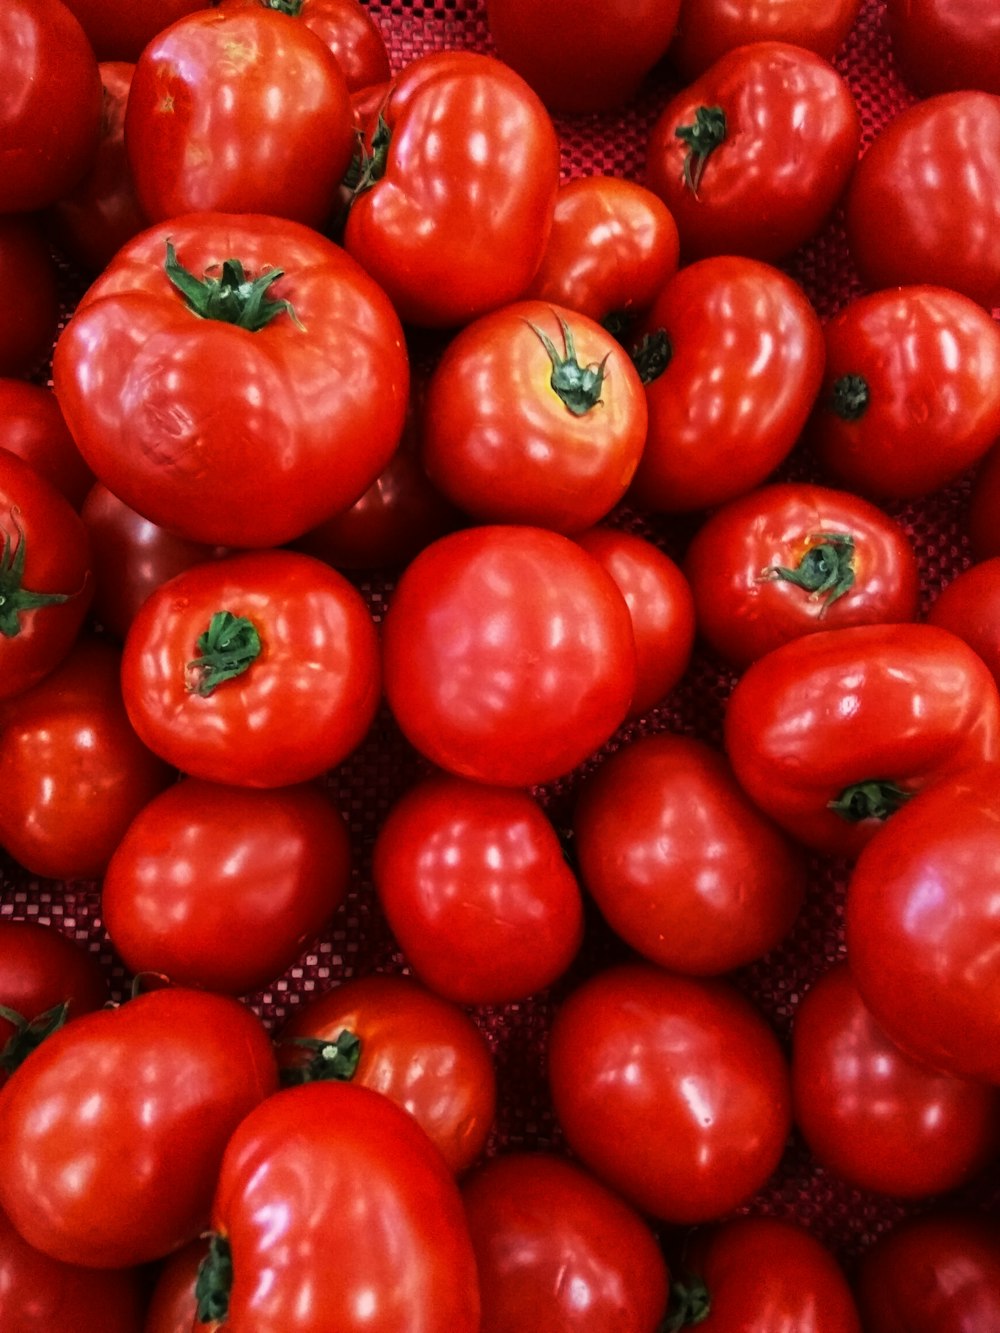 red tomato lot in close up photography